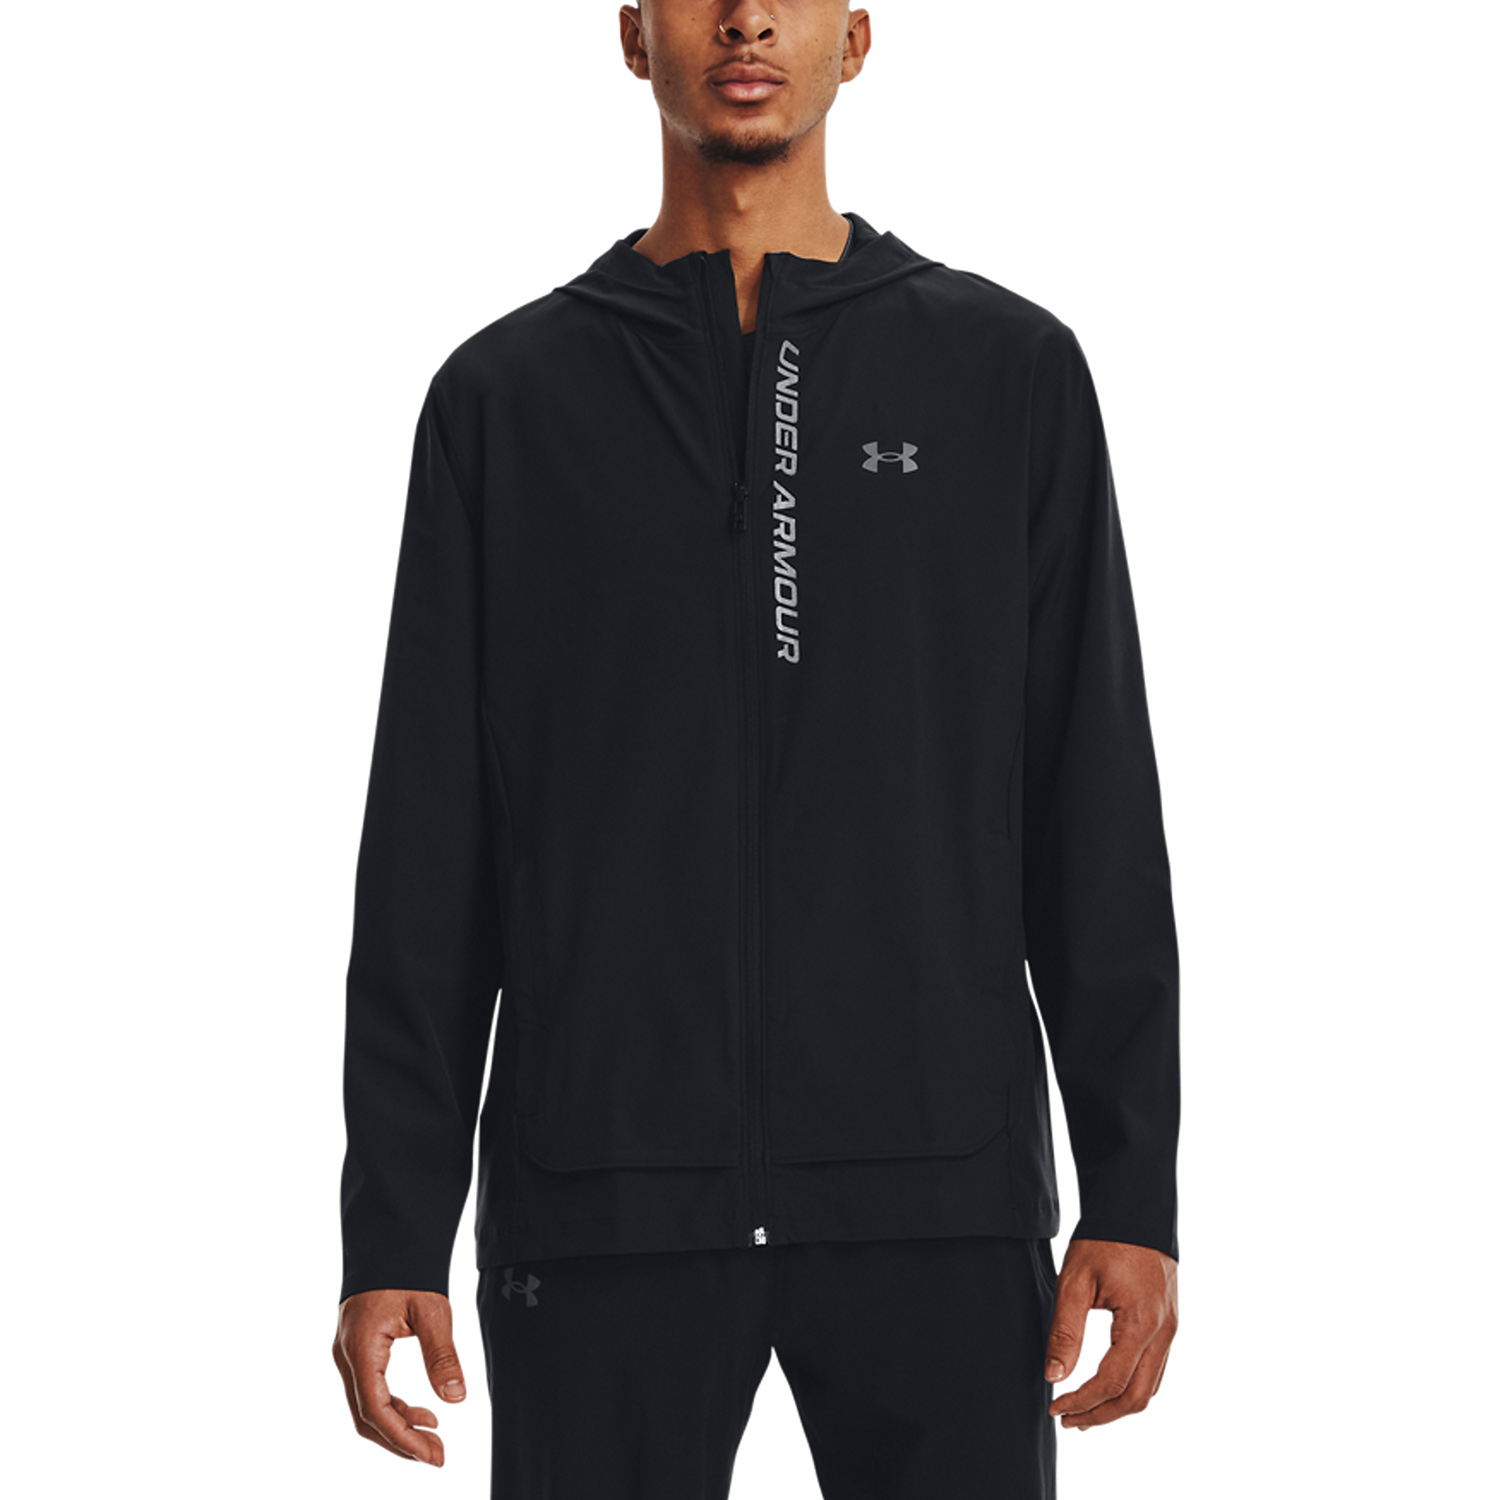 https://www.misterrunning.com/images/2023-media-05/under-armour-outrun-the-storm-giacca-da-running-uomo-black-1376794-0002_A.jpg